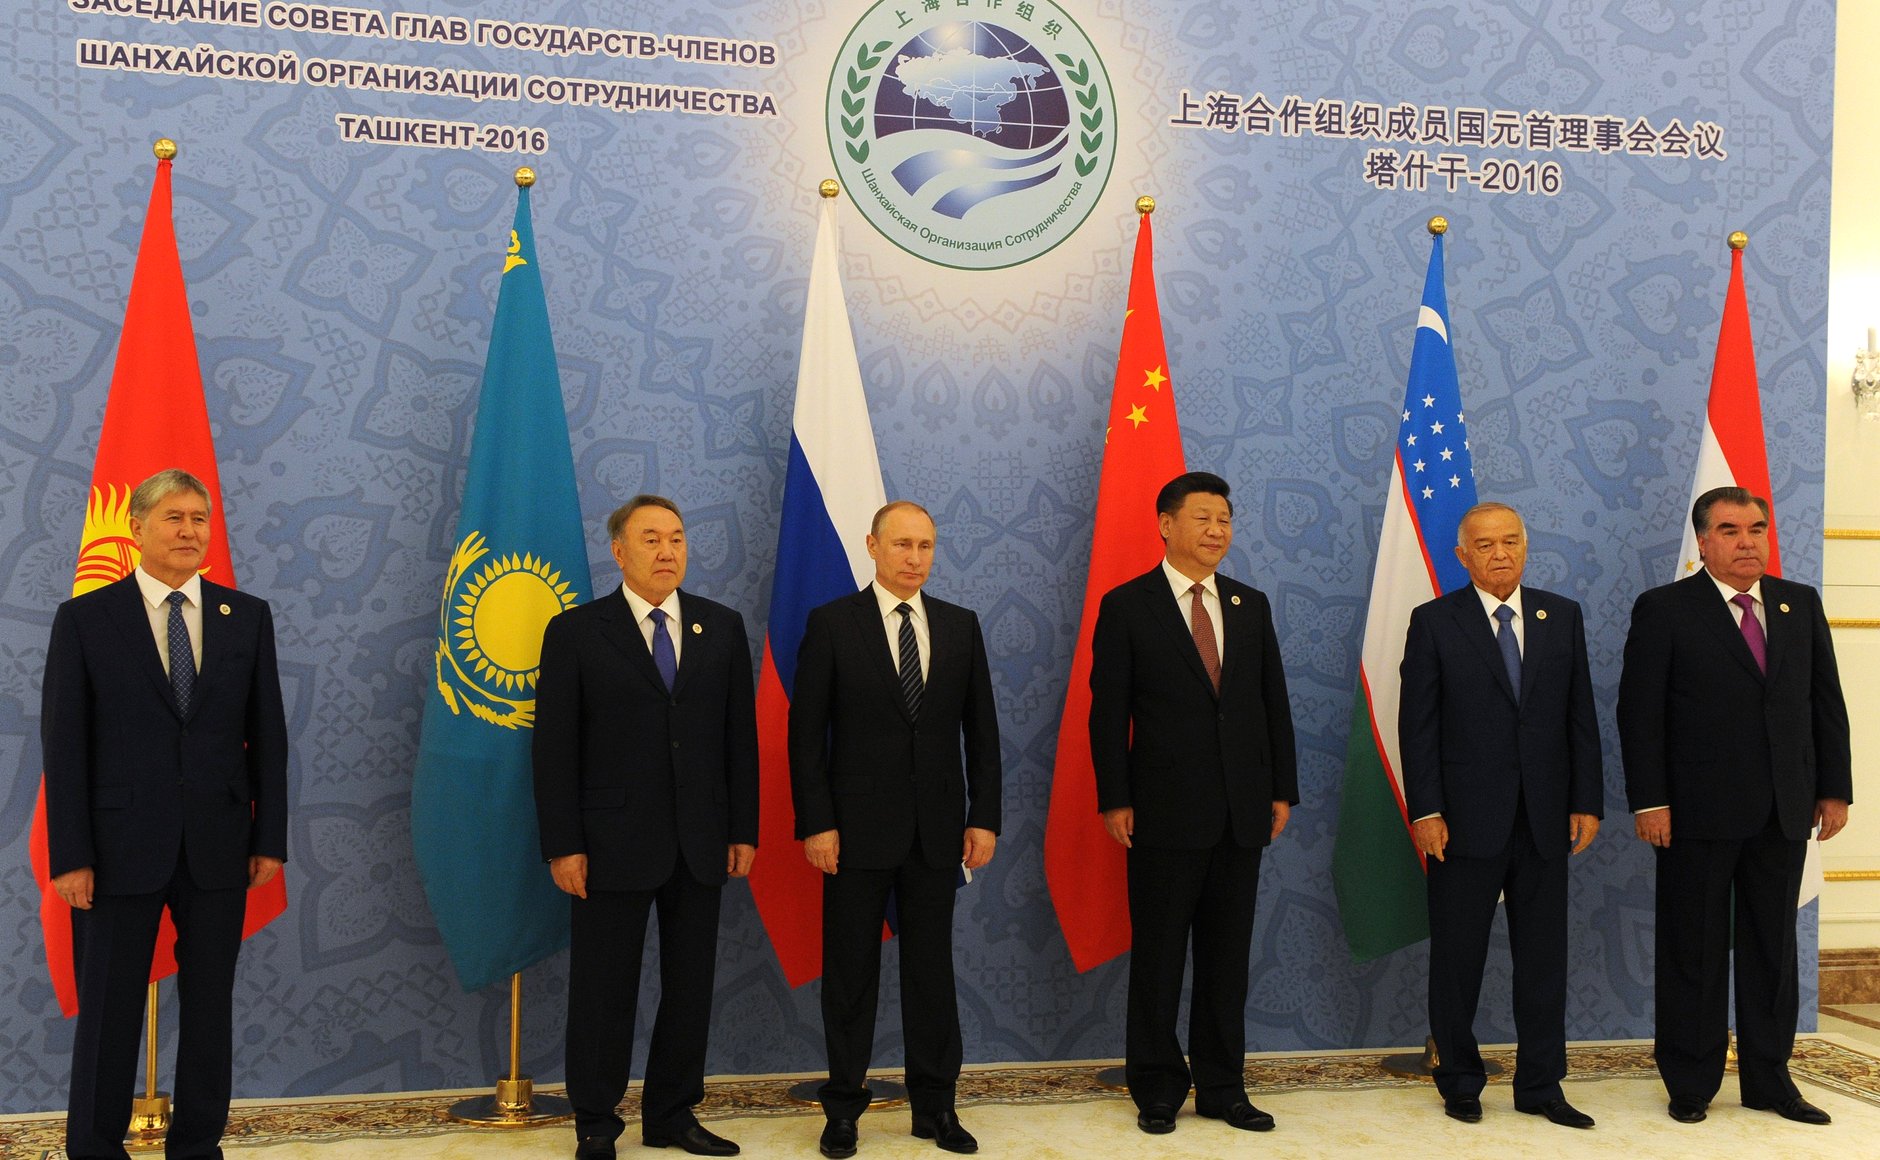 A decision to start the "horizontal expansion" of the SCO was made in 2009.